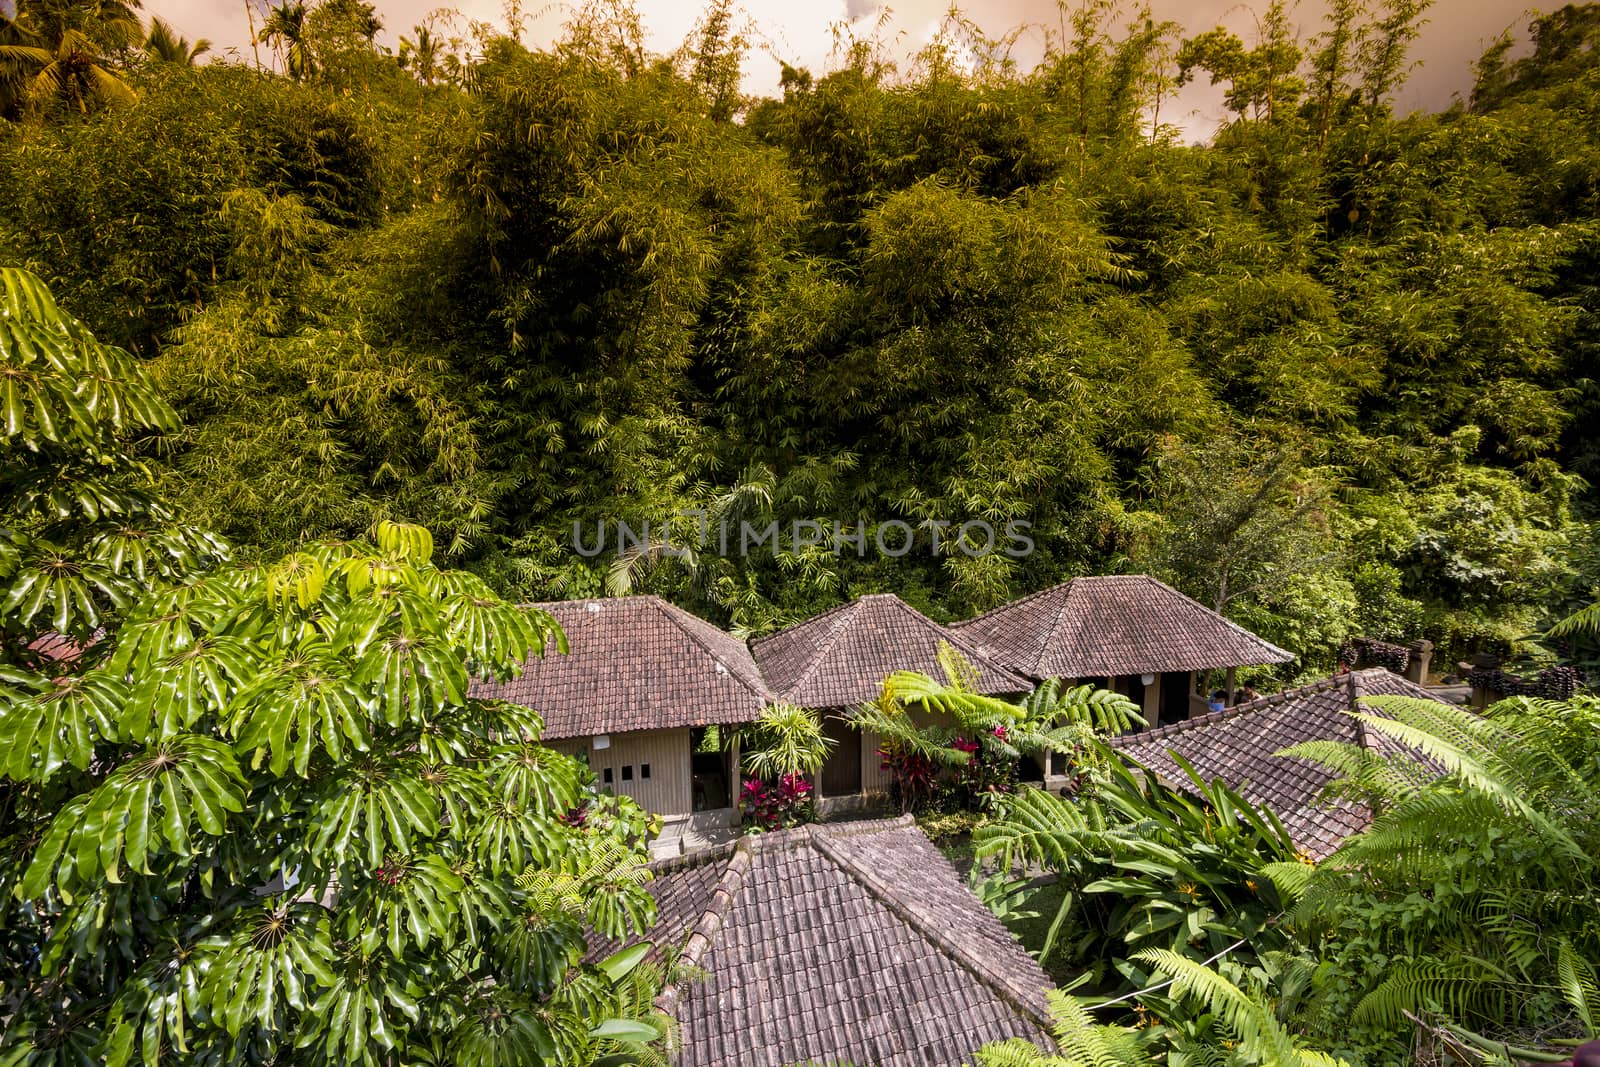 Traditional village in the Bamboo Forest of Bali